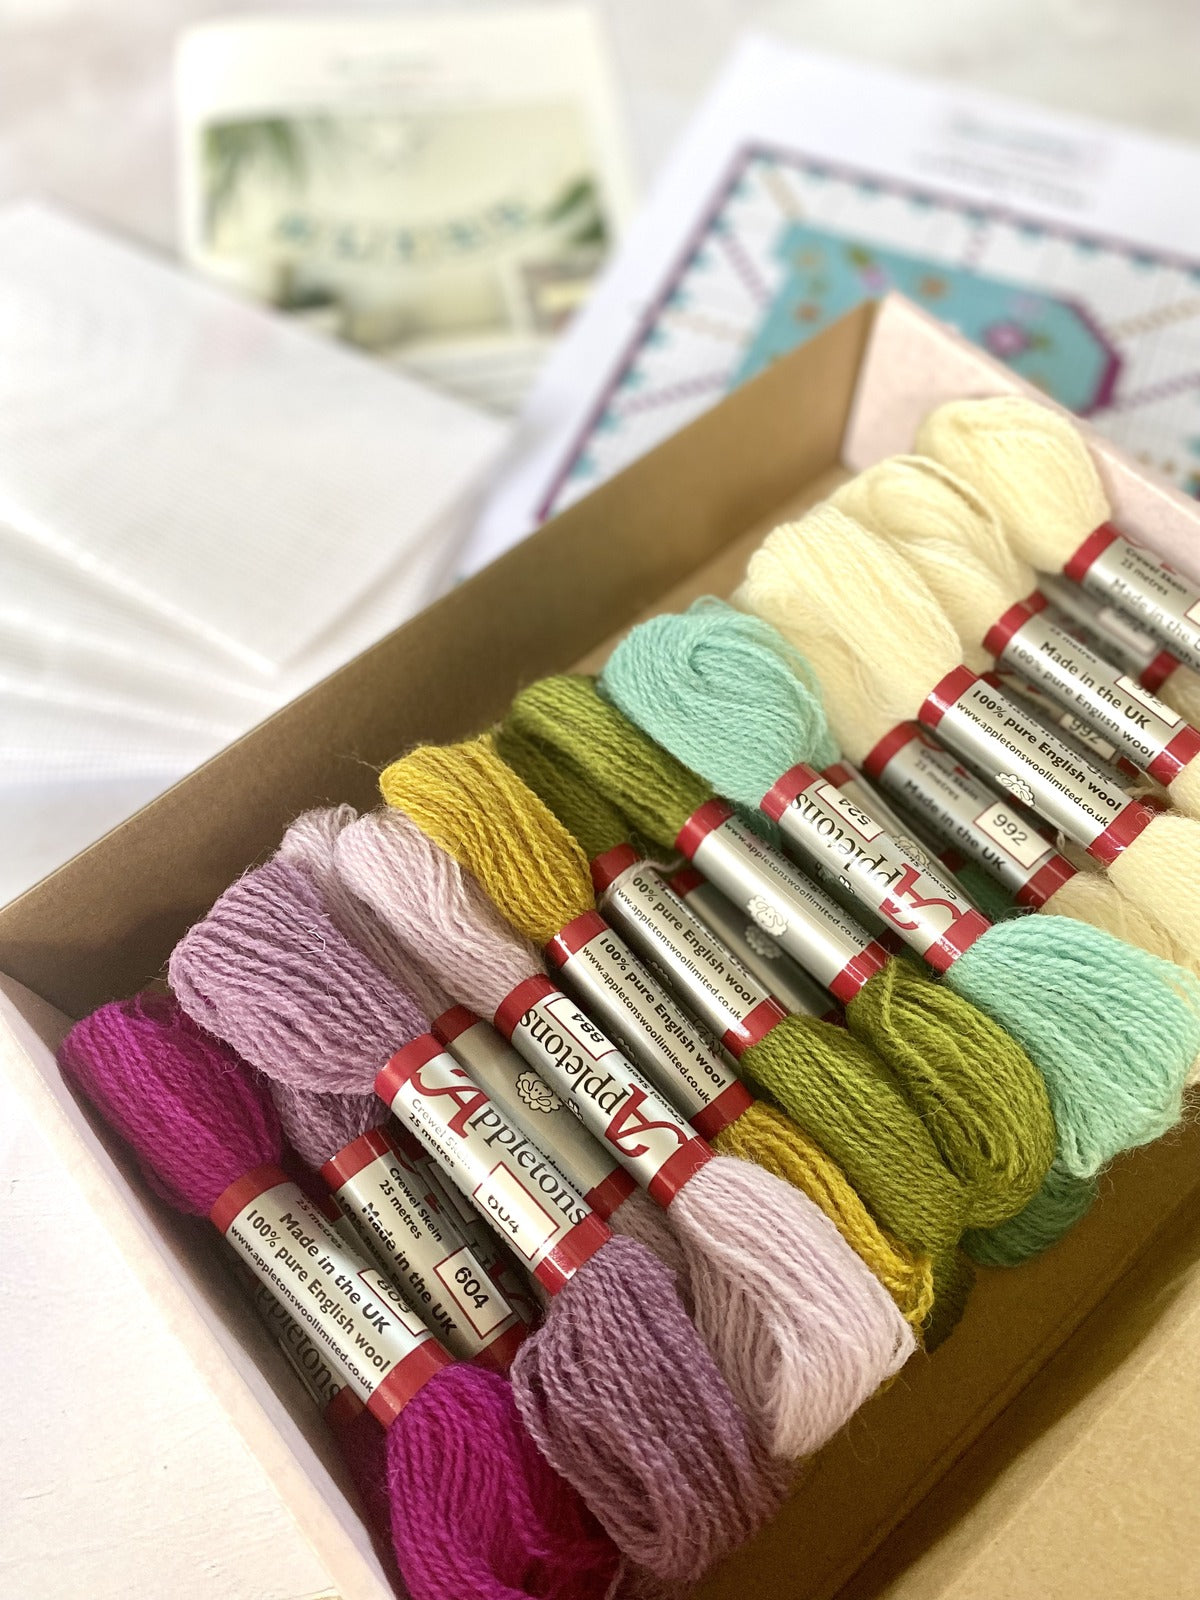 Indulge in the timeless art of cross-stitch with our exquisite tapestry kit, curated for wool enthusiasts. Crafted with premium wool threads, this is an easy tapestry kit that brings to life intricate designs and vibrant colors, offering a soothing and rewarding stitching experience.